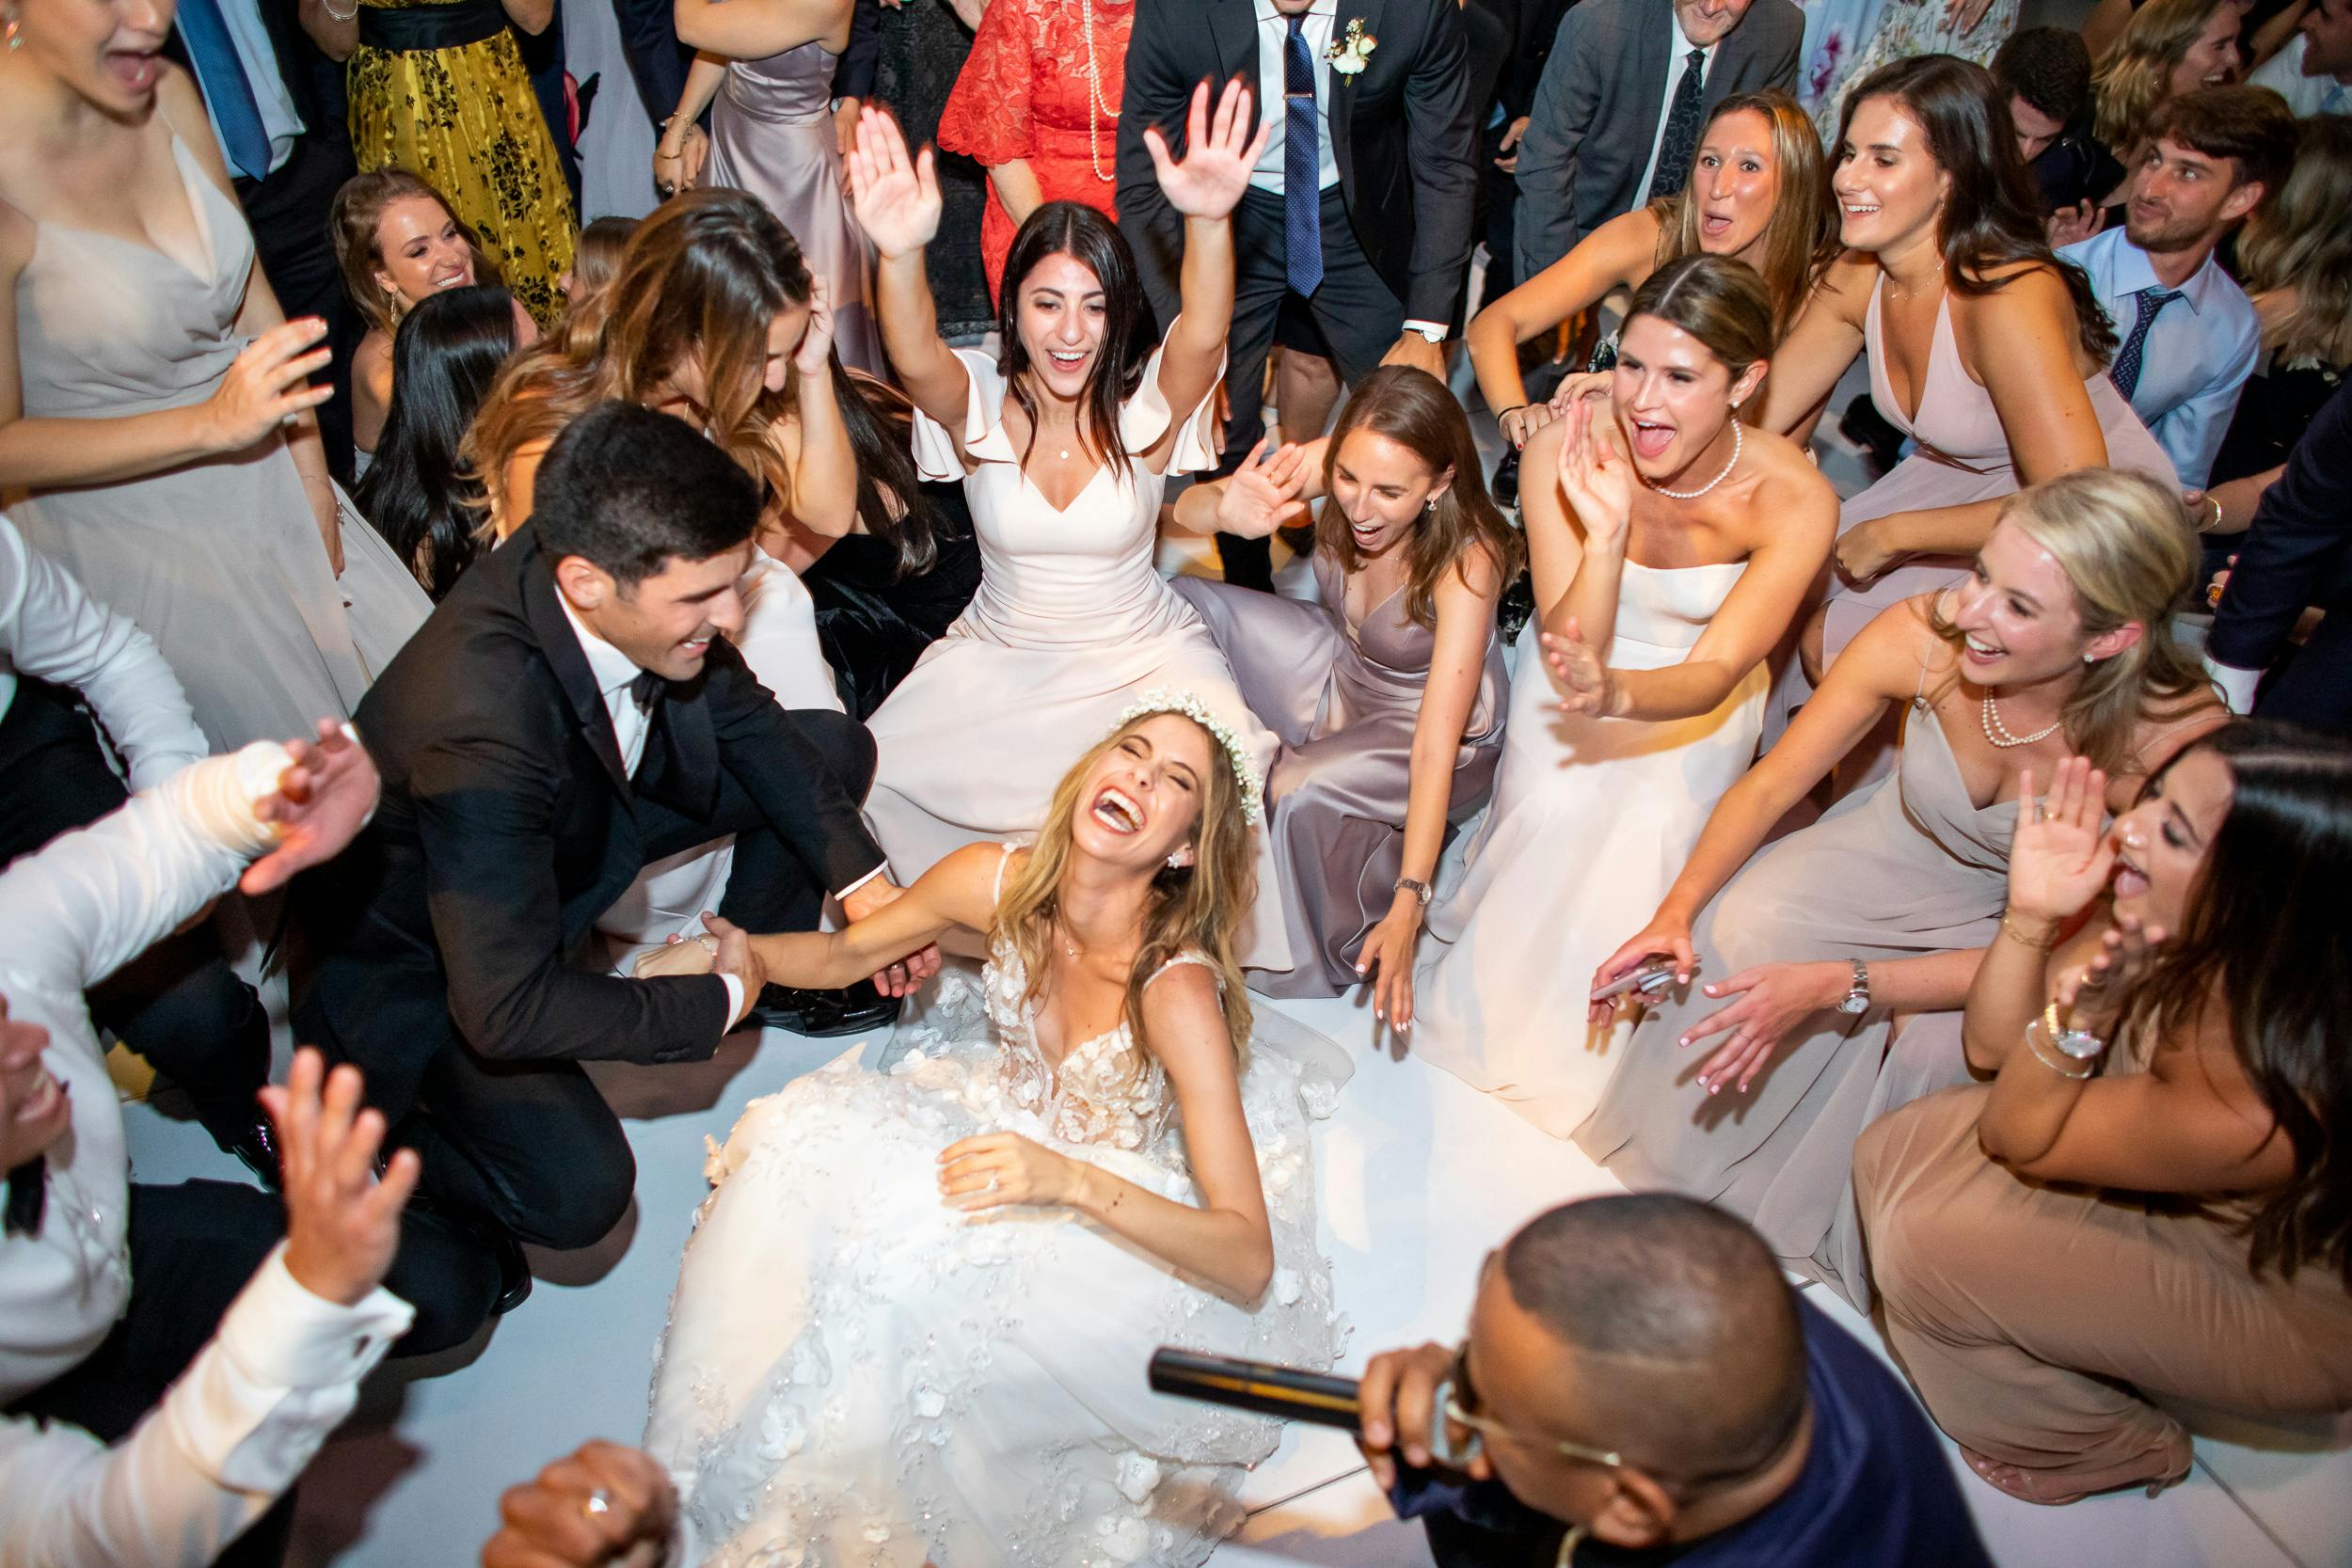 Bride, groom and friends dancing and laughing on dance floor during wedding reception | PartySlate